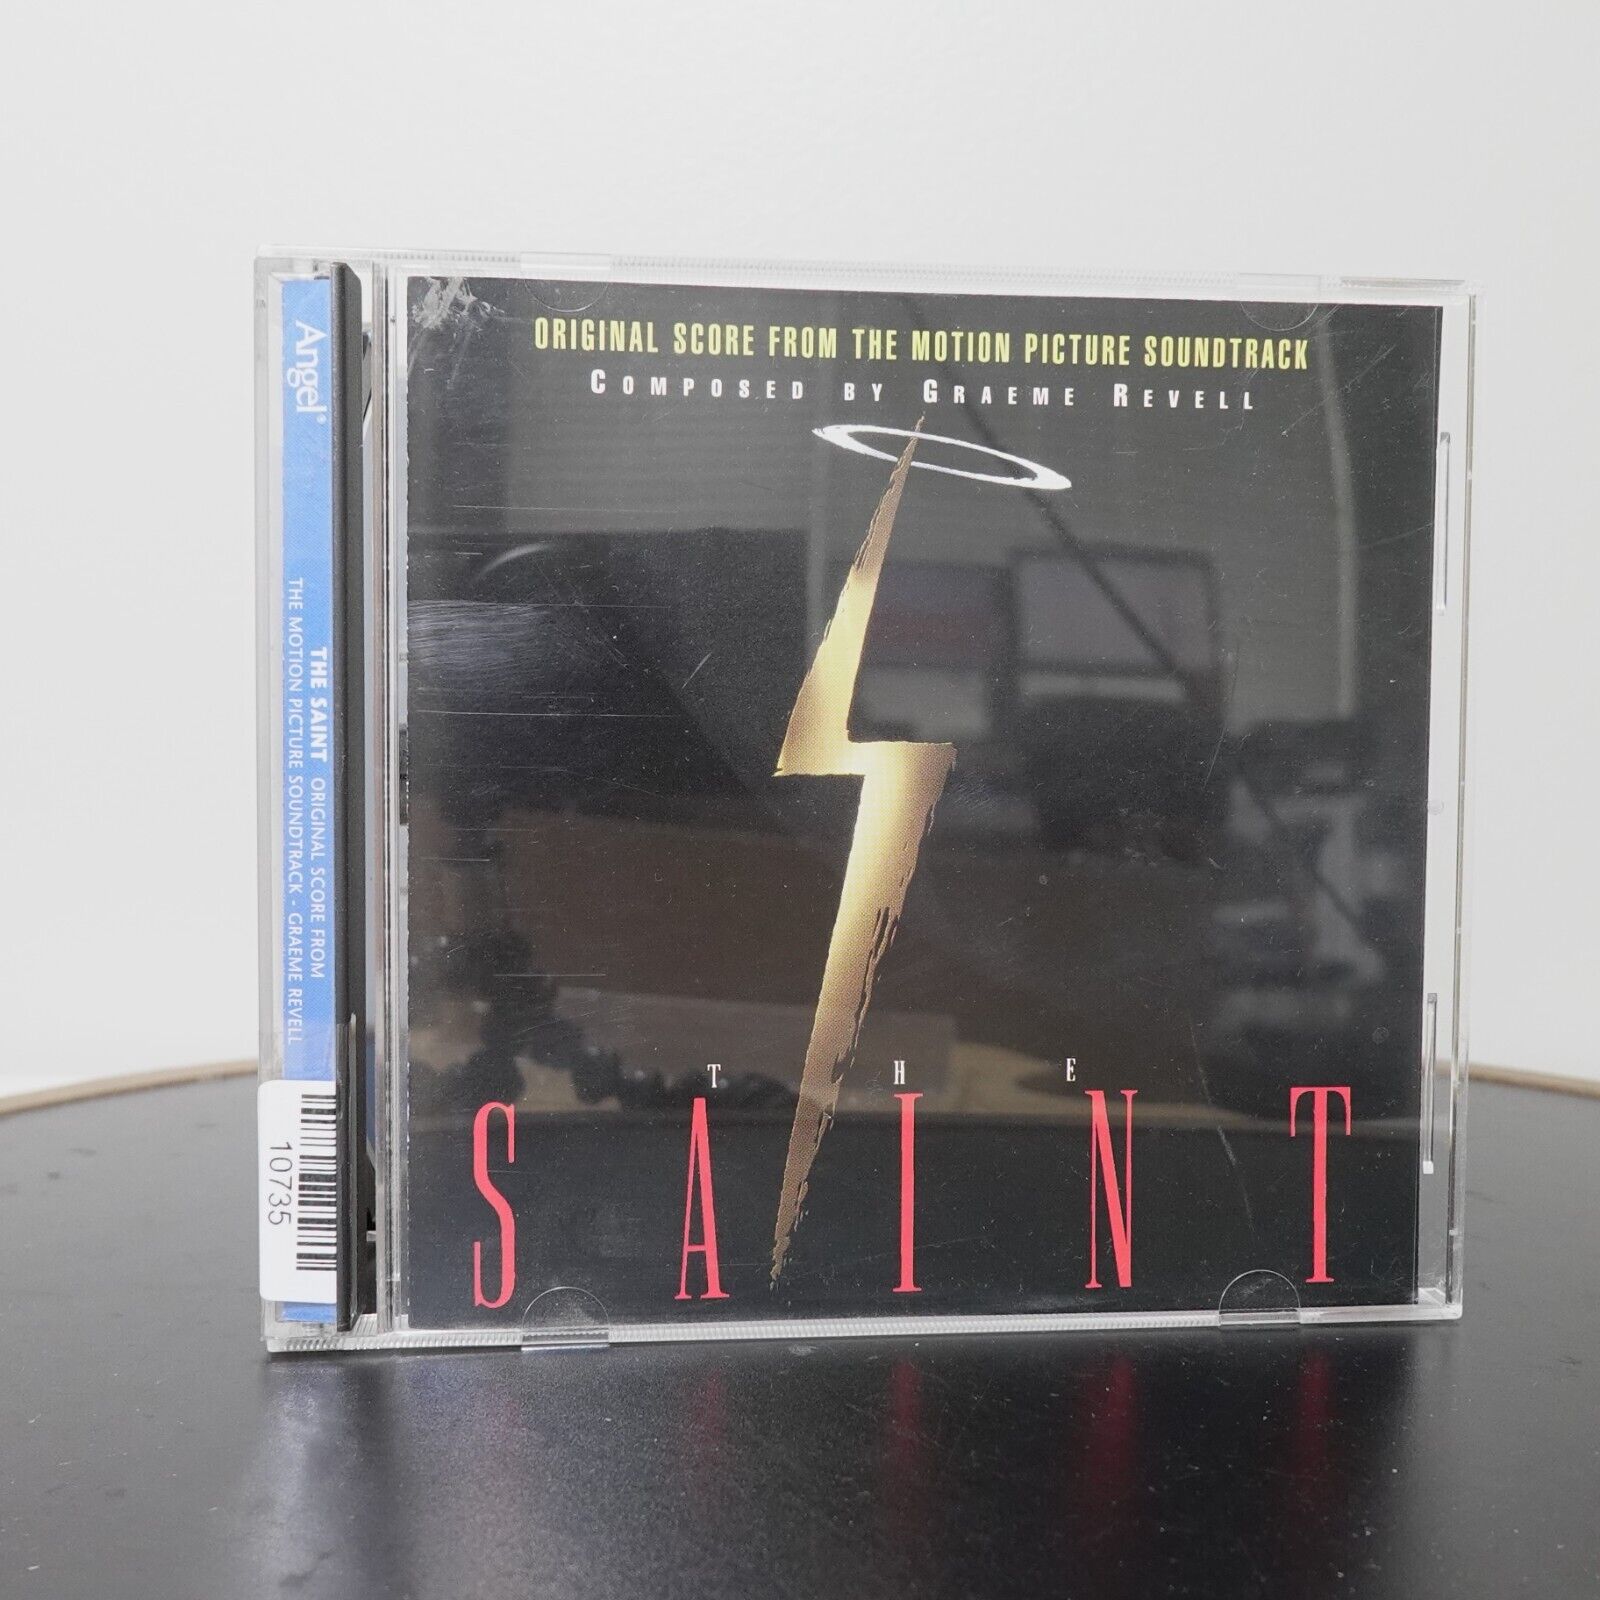 The Saint [Original Score] by Graeme Revell (Composer) (CD, May-1997, Angel...